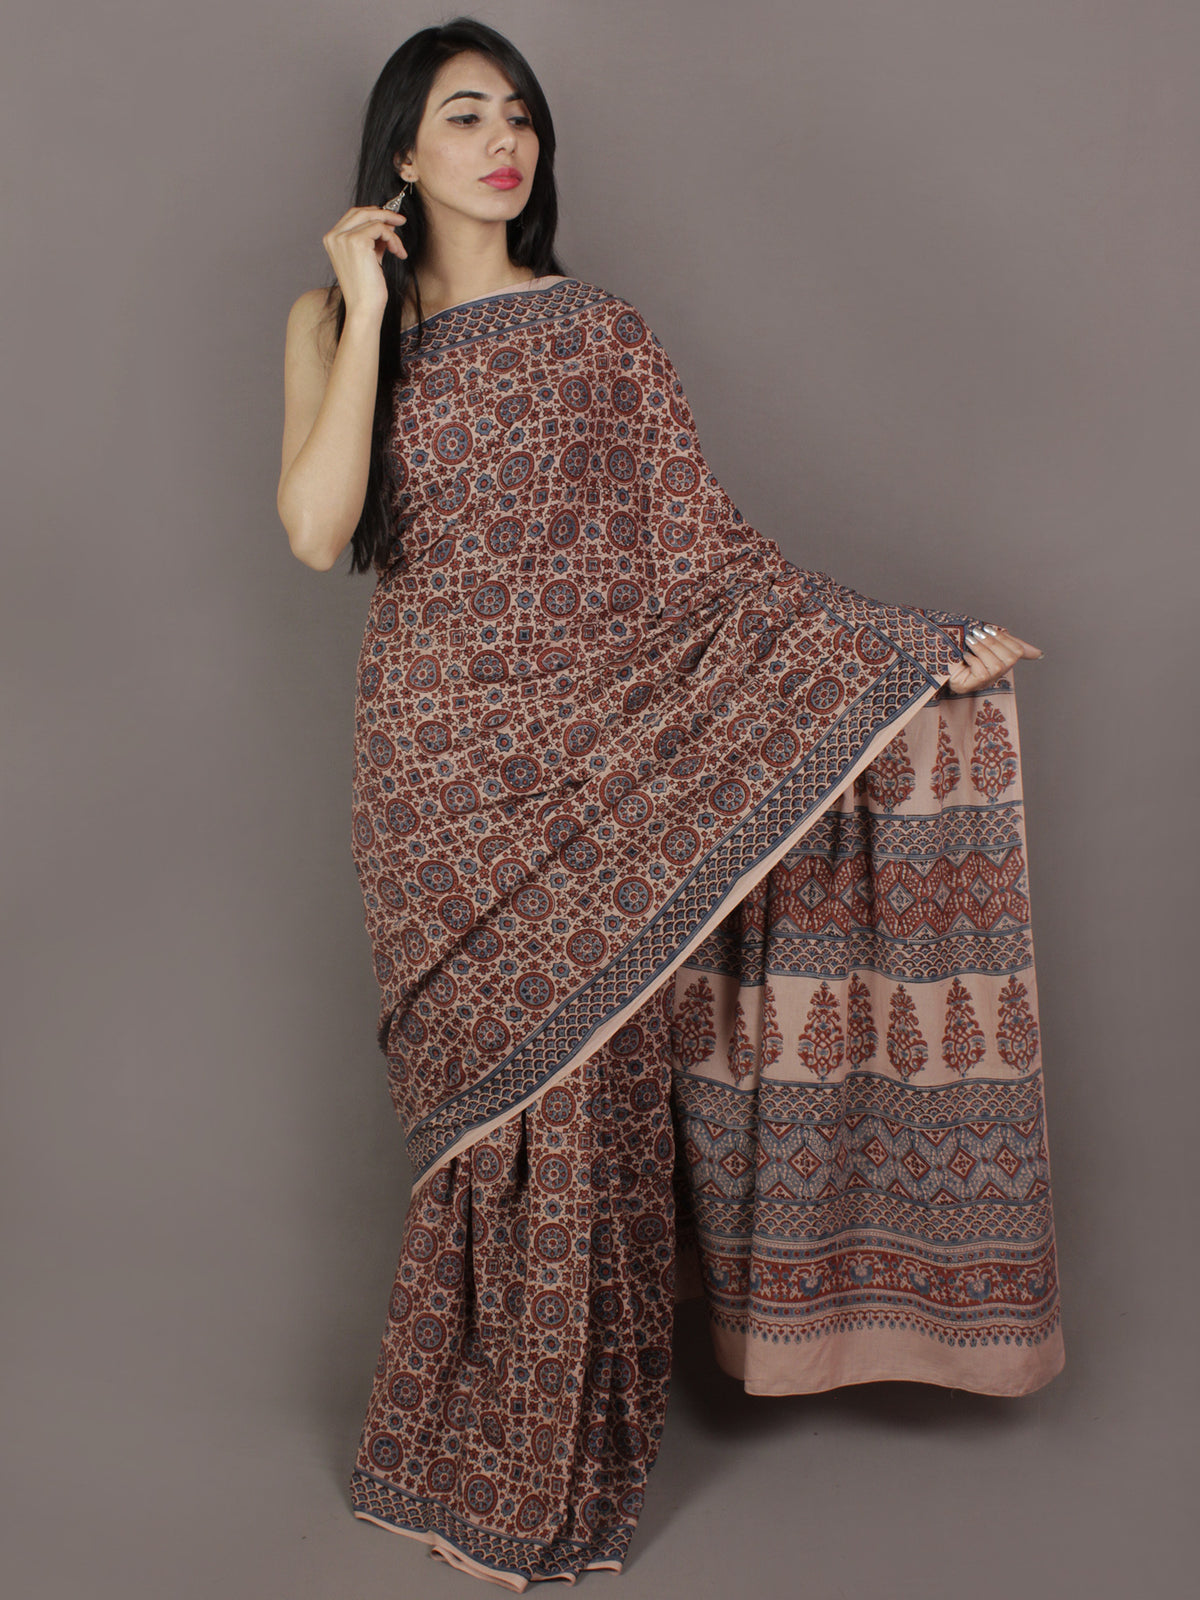 Ivory Maroon Steel Blue Mughal Nakashi Ajrakh Hand Block Printed in Natural Vegetable Colors Cotton Mul Saree - S031701139